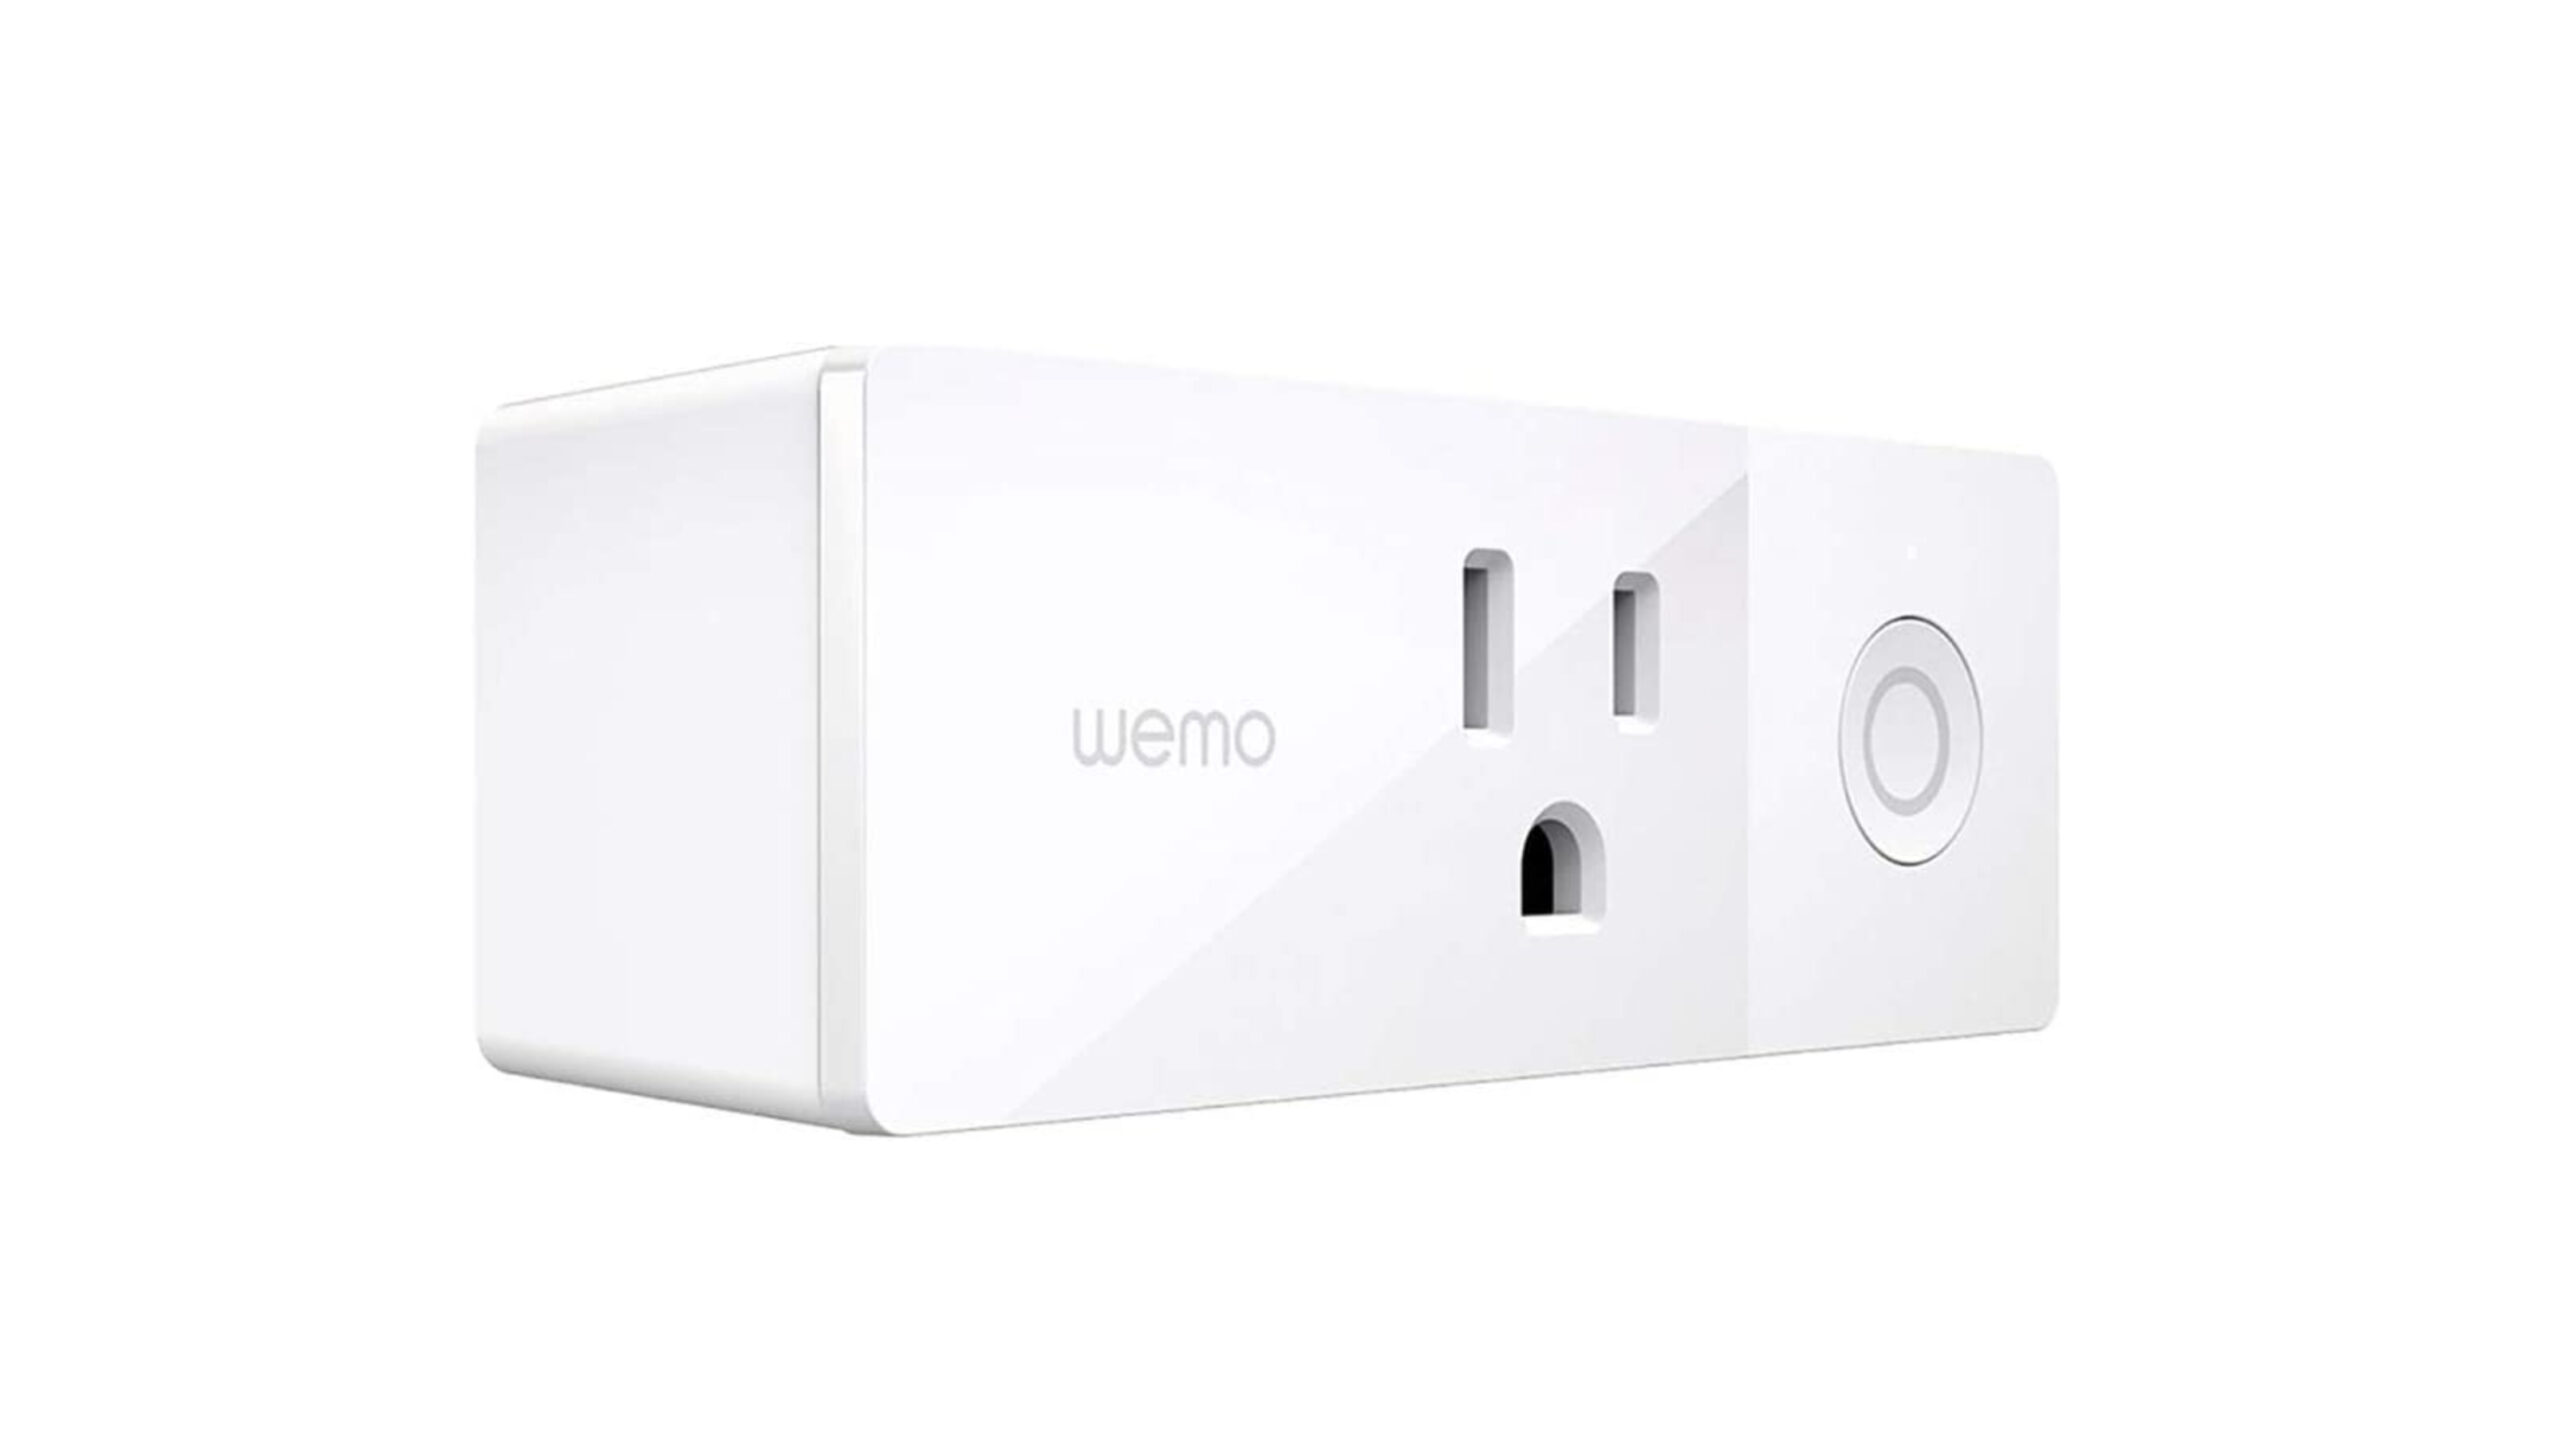 Serious Unpatched Vulnerability Uncovered in Popular Belkin Wemo Smart Plugs